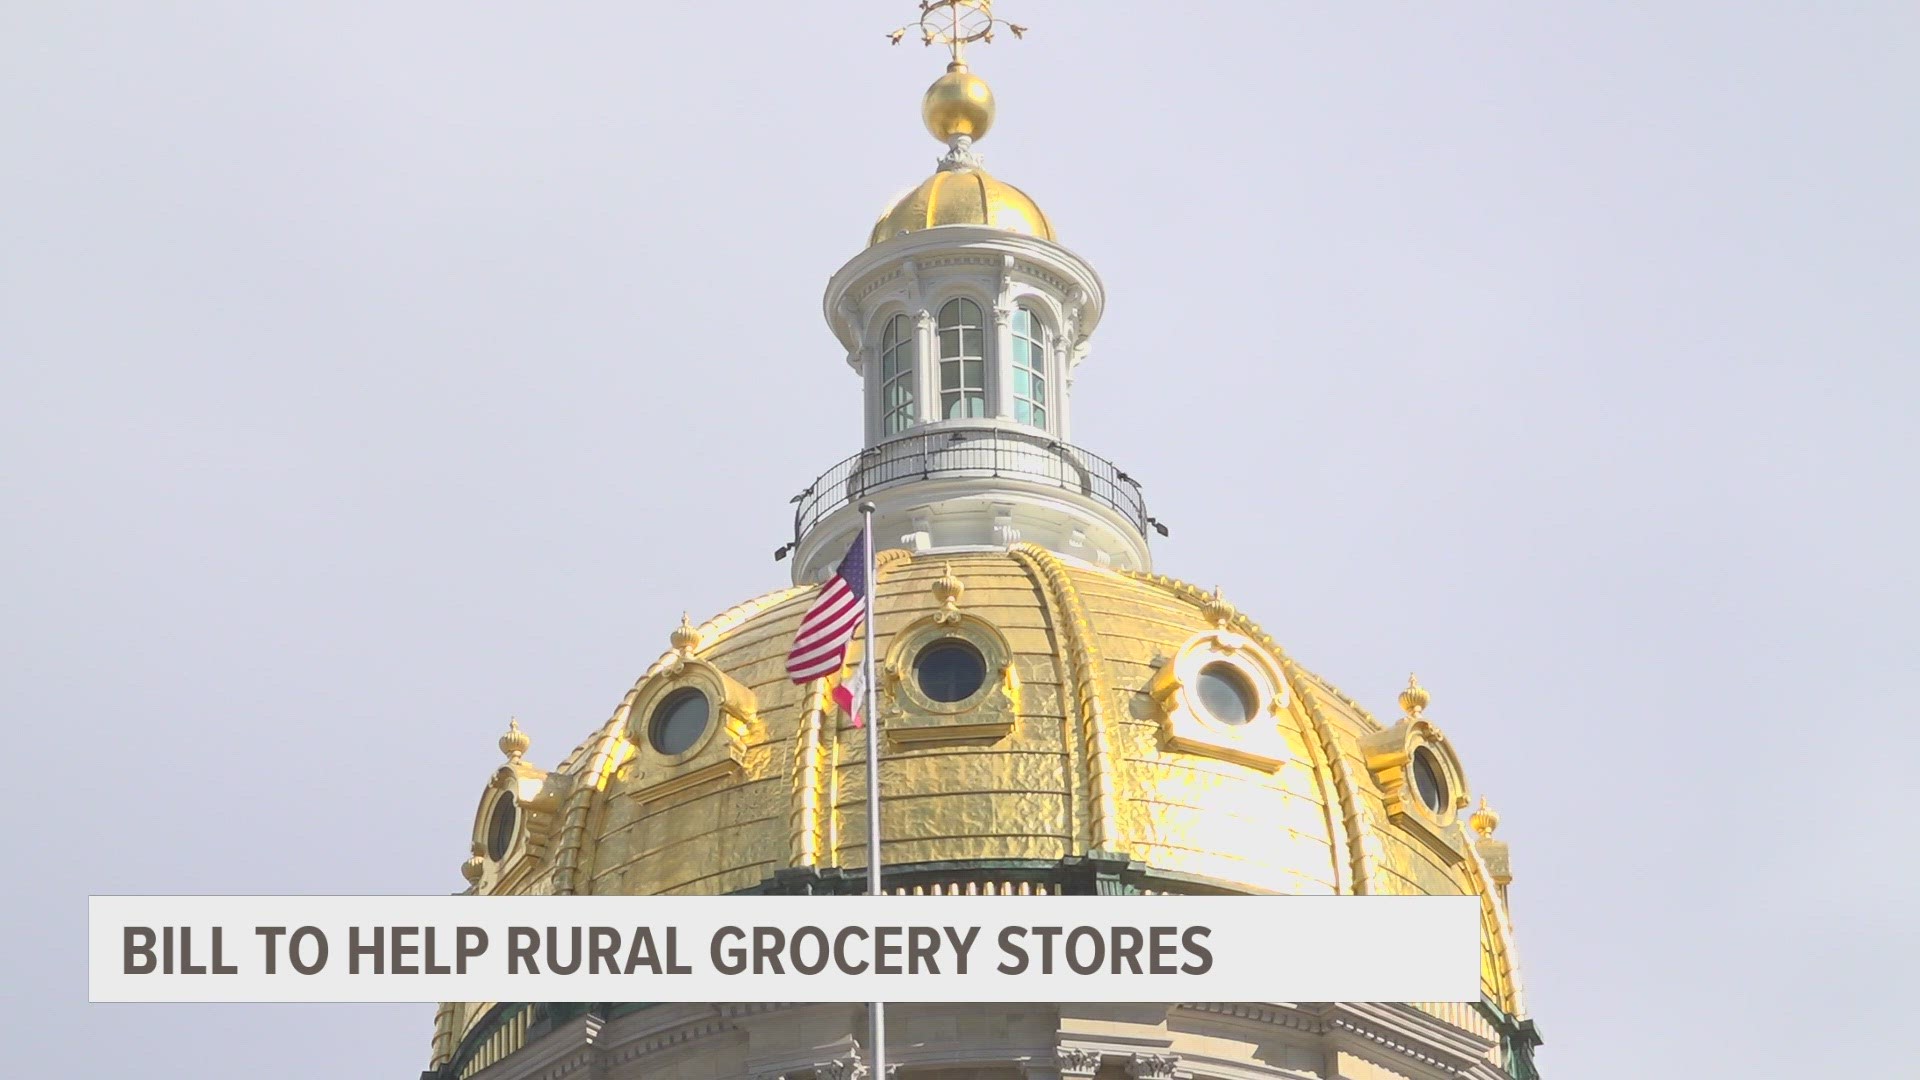 If signed into law, the bill would create a grocer reinvestment funding. The funds would help go towards grocery stores that need financial assistance.